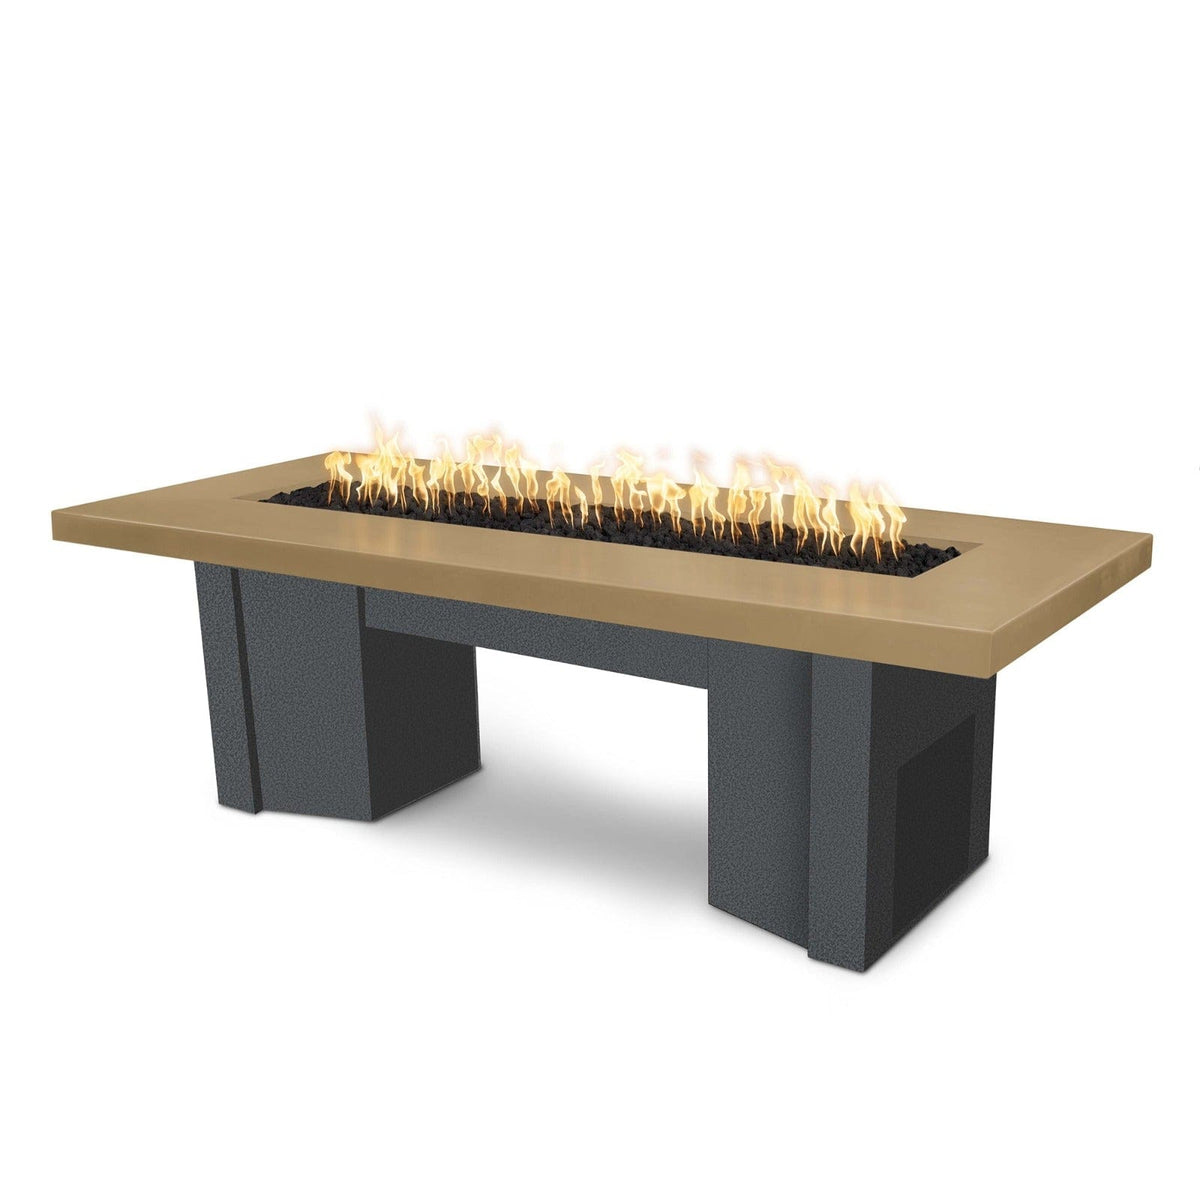 The Outdoor Plus Fire Features Brown (-BRN) / Silver Vein Powder Coated Steel (-SLV) The Outdoor Plus 60&quot; Alameda Fire Table Smooth Concrete in Liquid Propane - 110V Plug &amp; Play Electronic Ignition / OPT-ALMGFRC60EKIT-LP